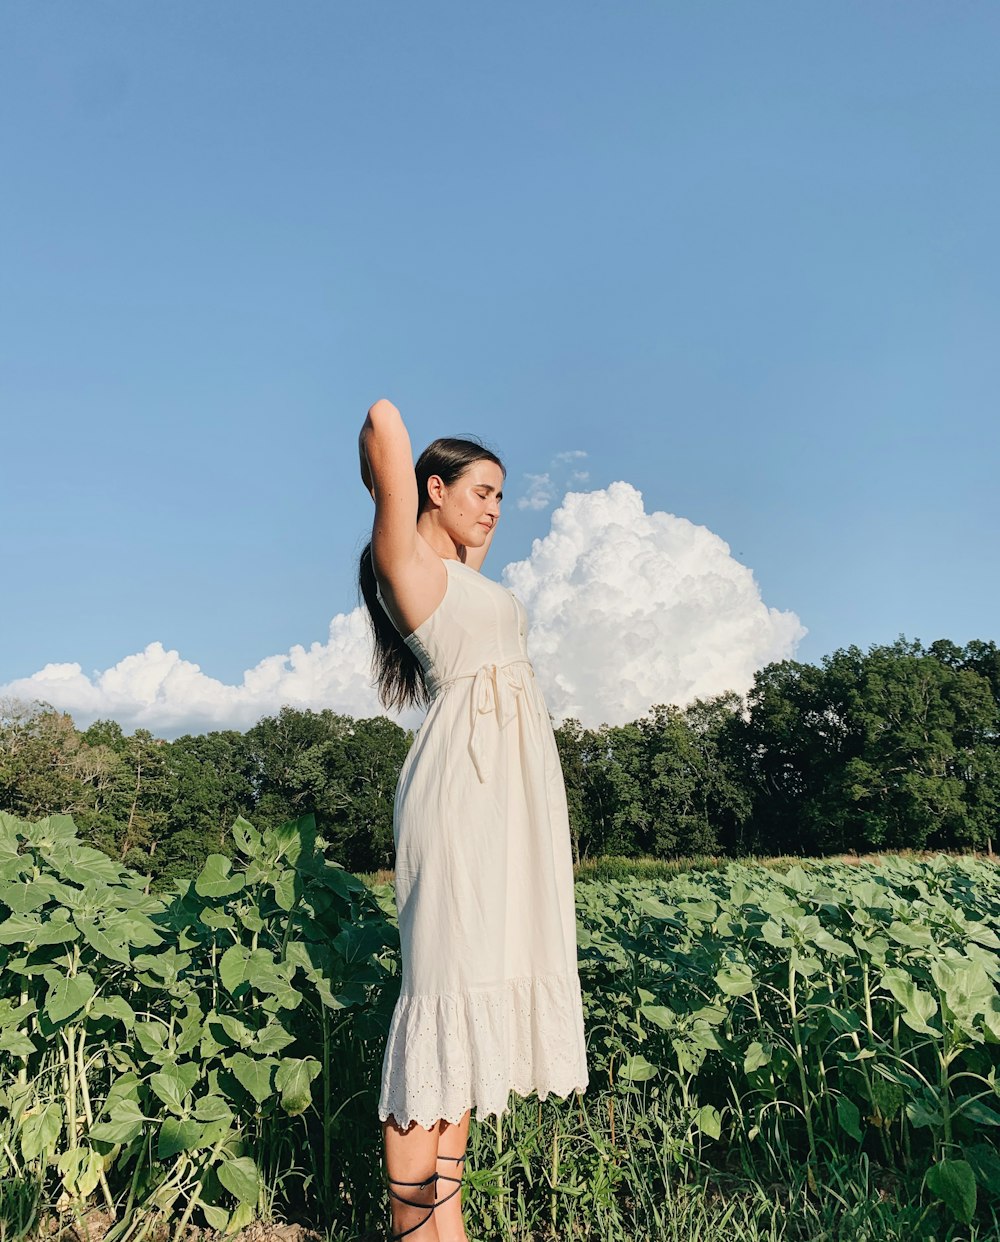 woman in white dress standing on green grass field during daytime